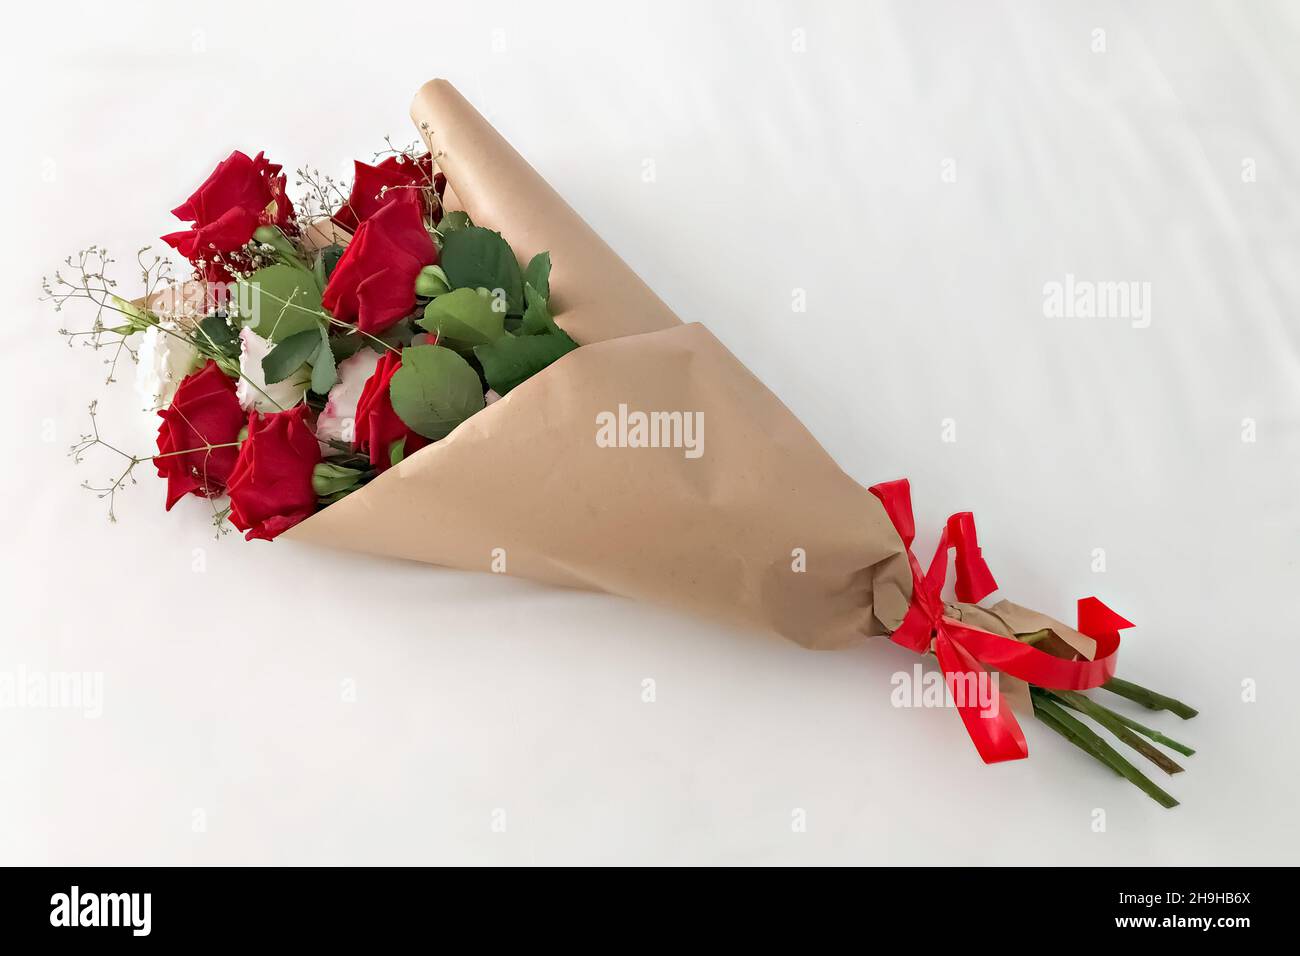 Florist Making A Red Roses Bouquet Wrapping In Kraft Paper On A Wooden  Table Top View Rustic Style Stock Photo - Download Image Now - iStock